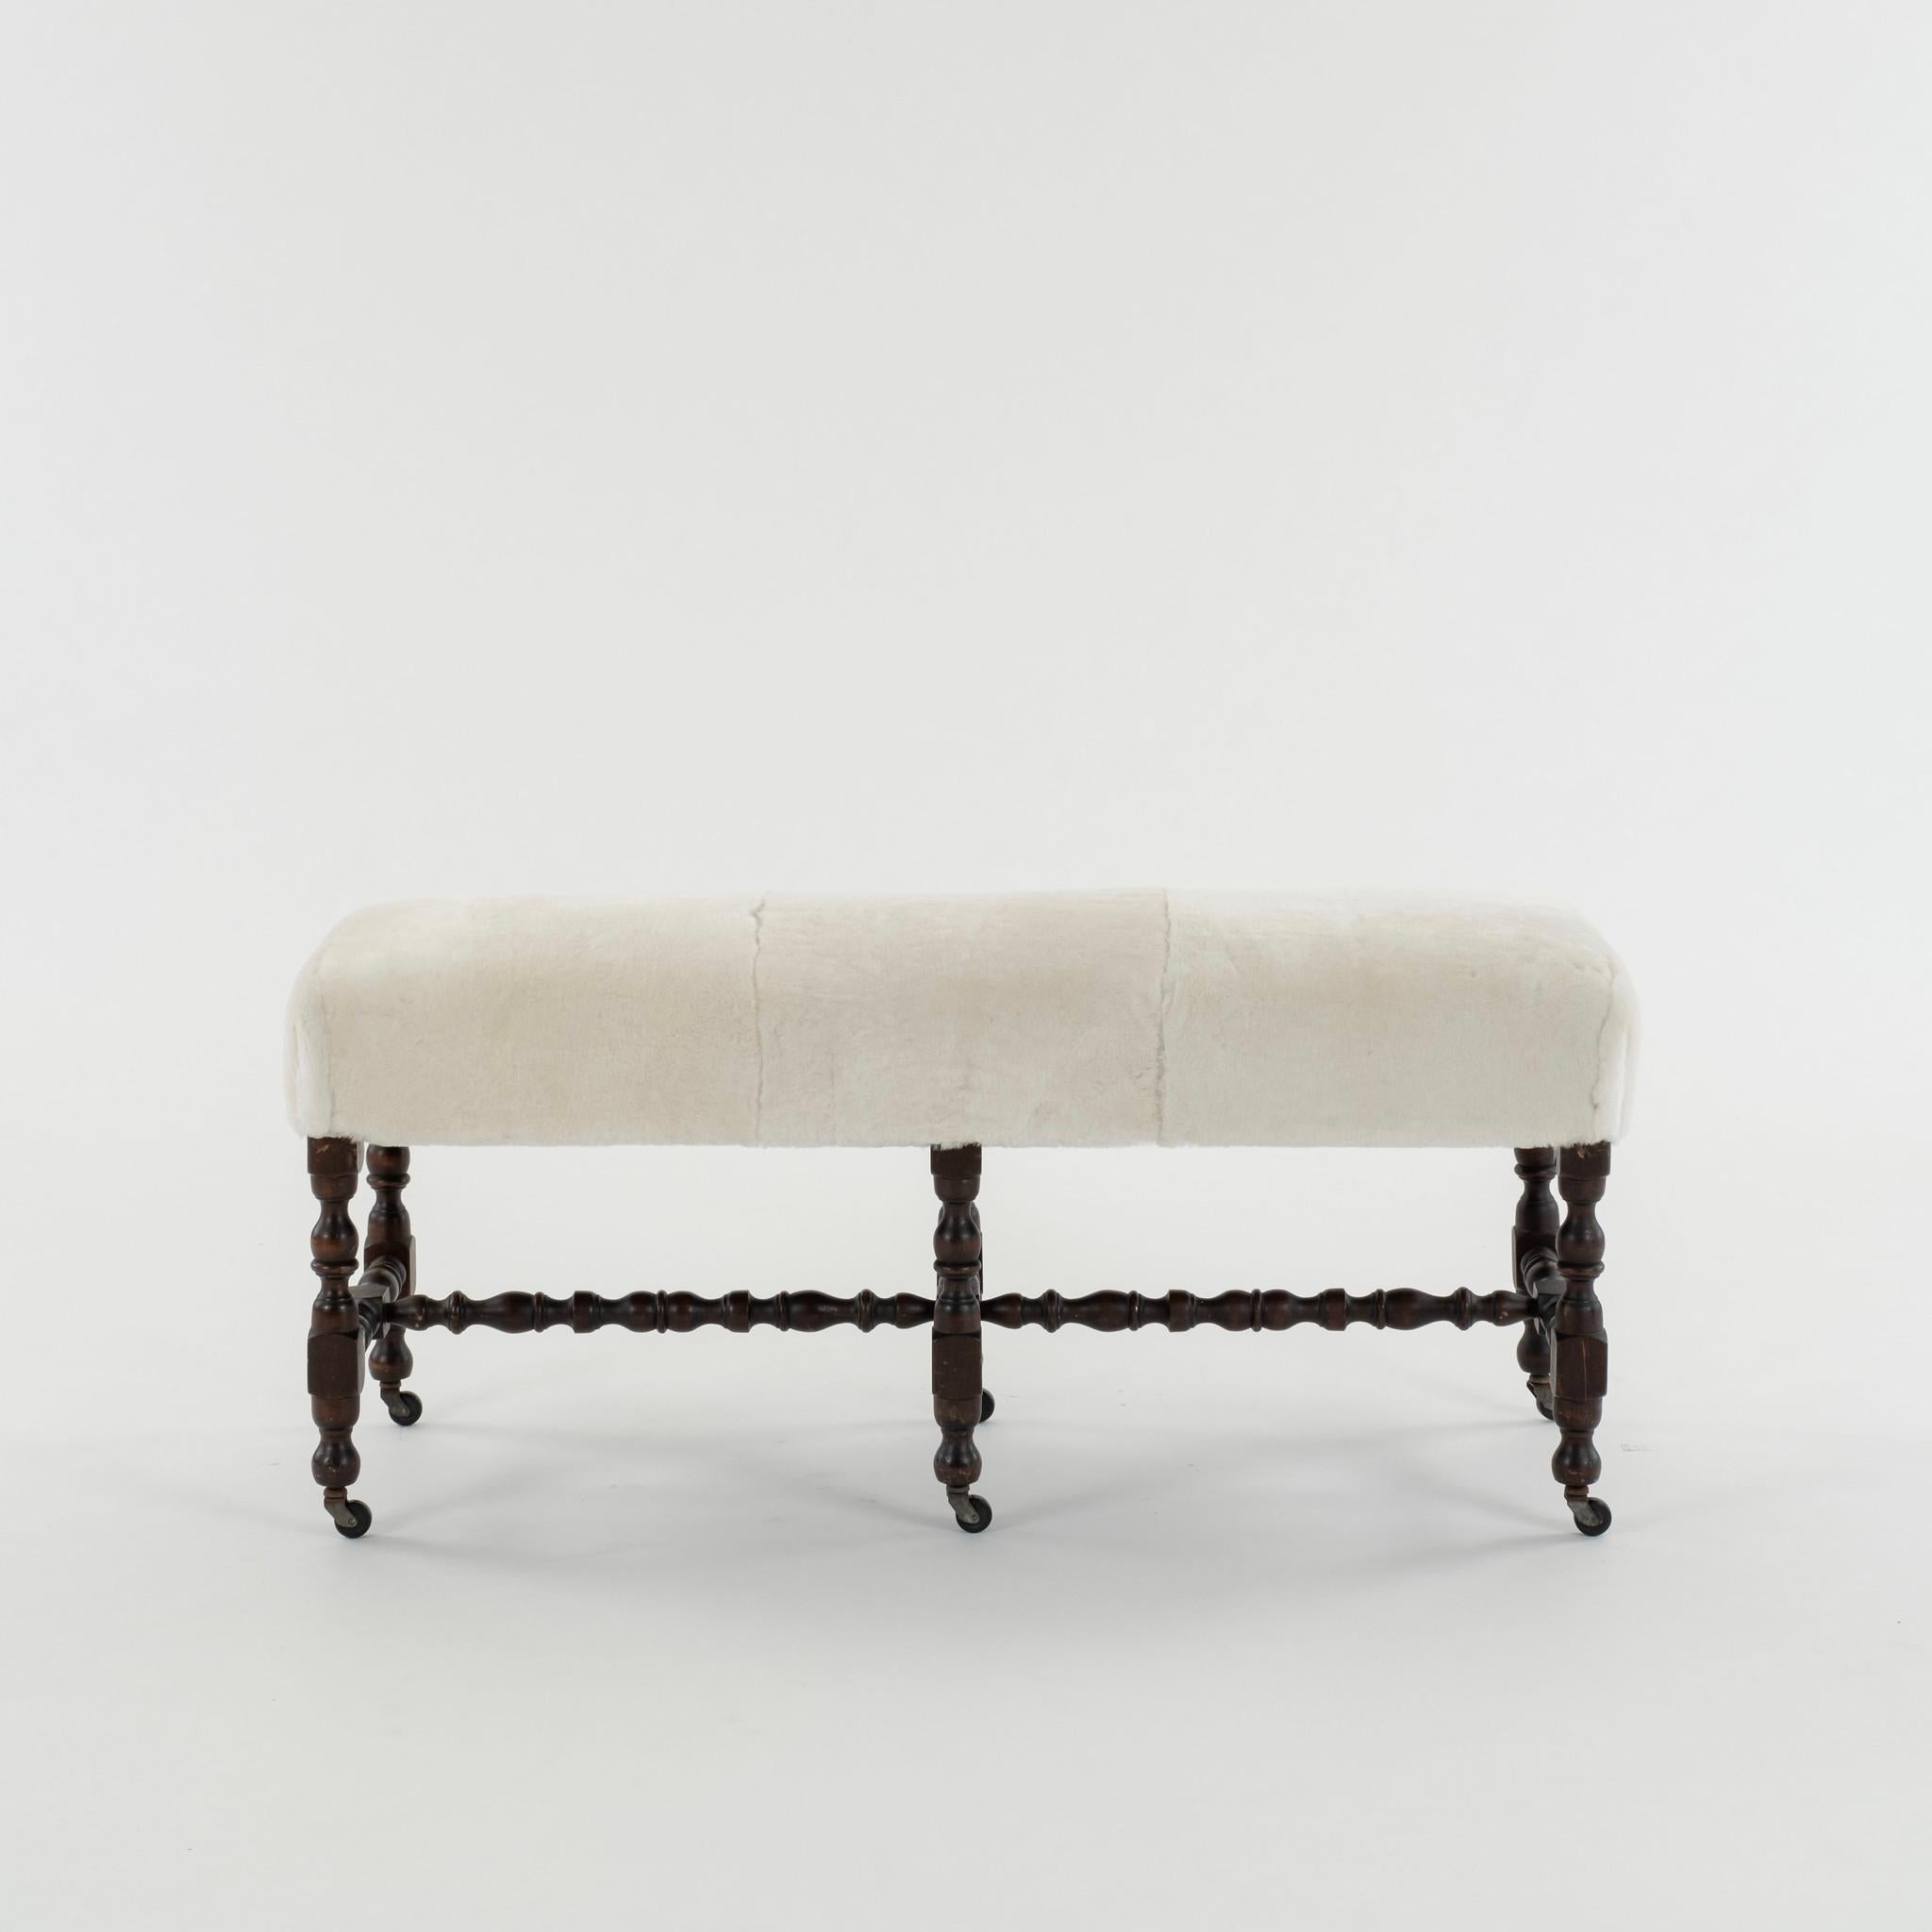 Flemish 19th century Louis XIII style hand carved bench on casters newly upholstered in a white sheepskin shearling.